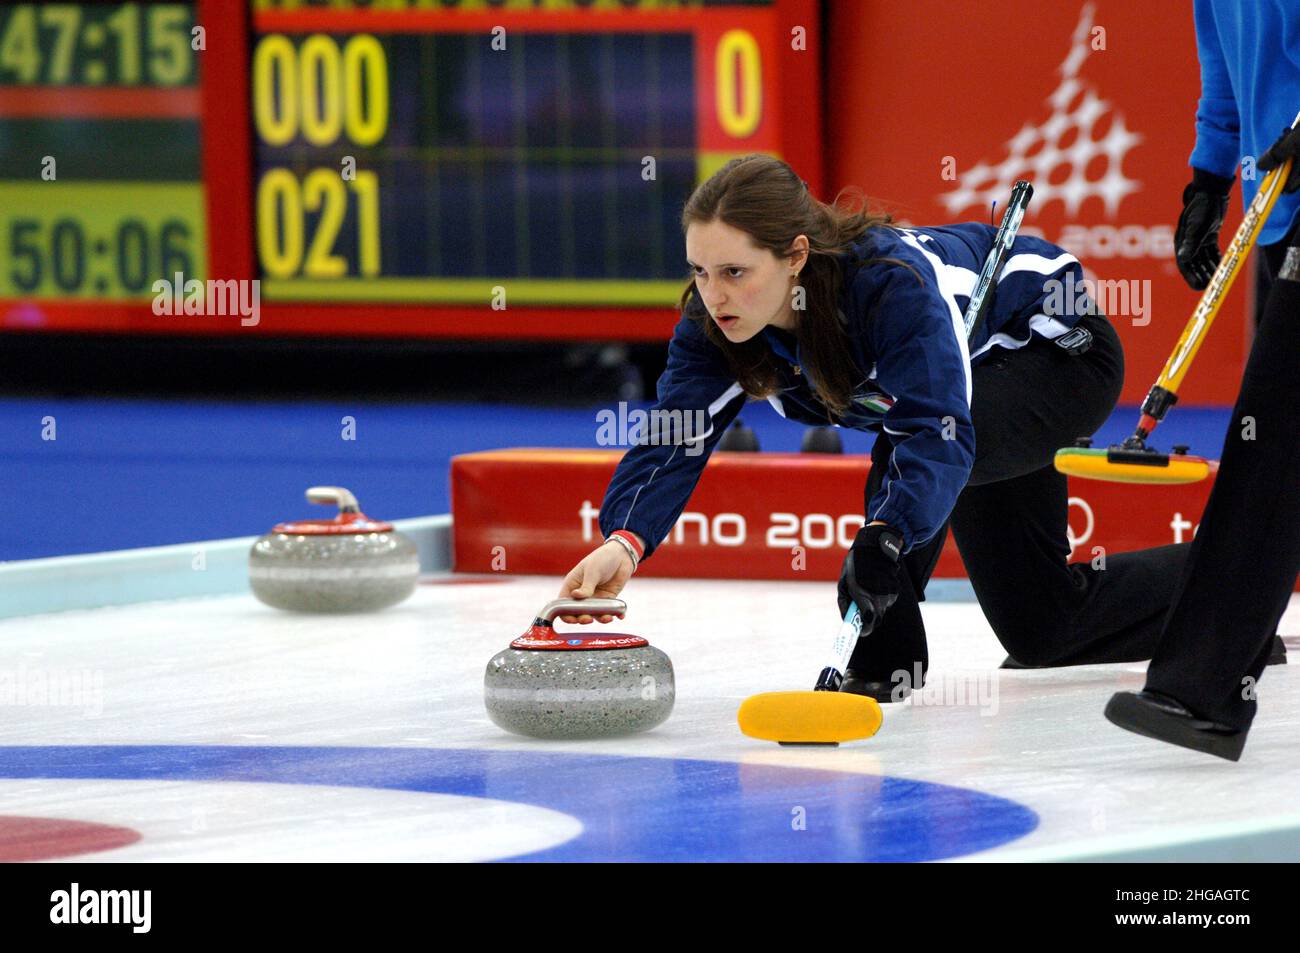 Pinerolo Italy 2006-02-19: Turin 2006 Olympic Winter Games, Italian women's team of Curling,Diana Gaspari  during the game Stock Photo